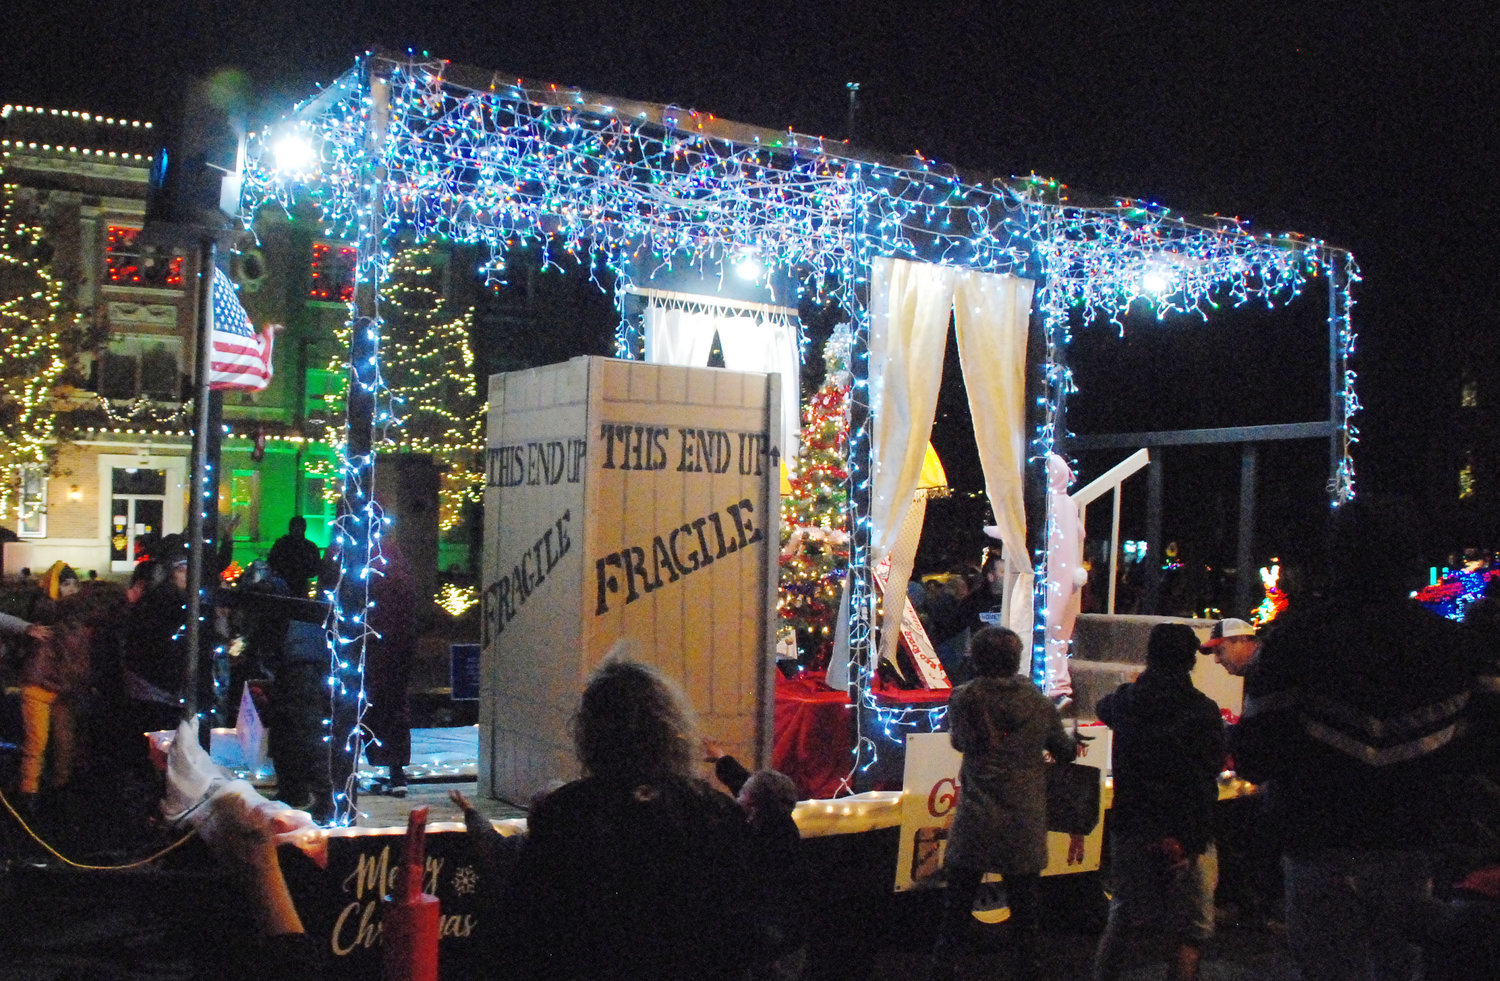 HOMETOWN PRINT HOUSE entered a float that recreated the living room in “A Christmas Story,” a 1983 film in which Ralphie Parker’s father wins “a major award.”